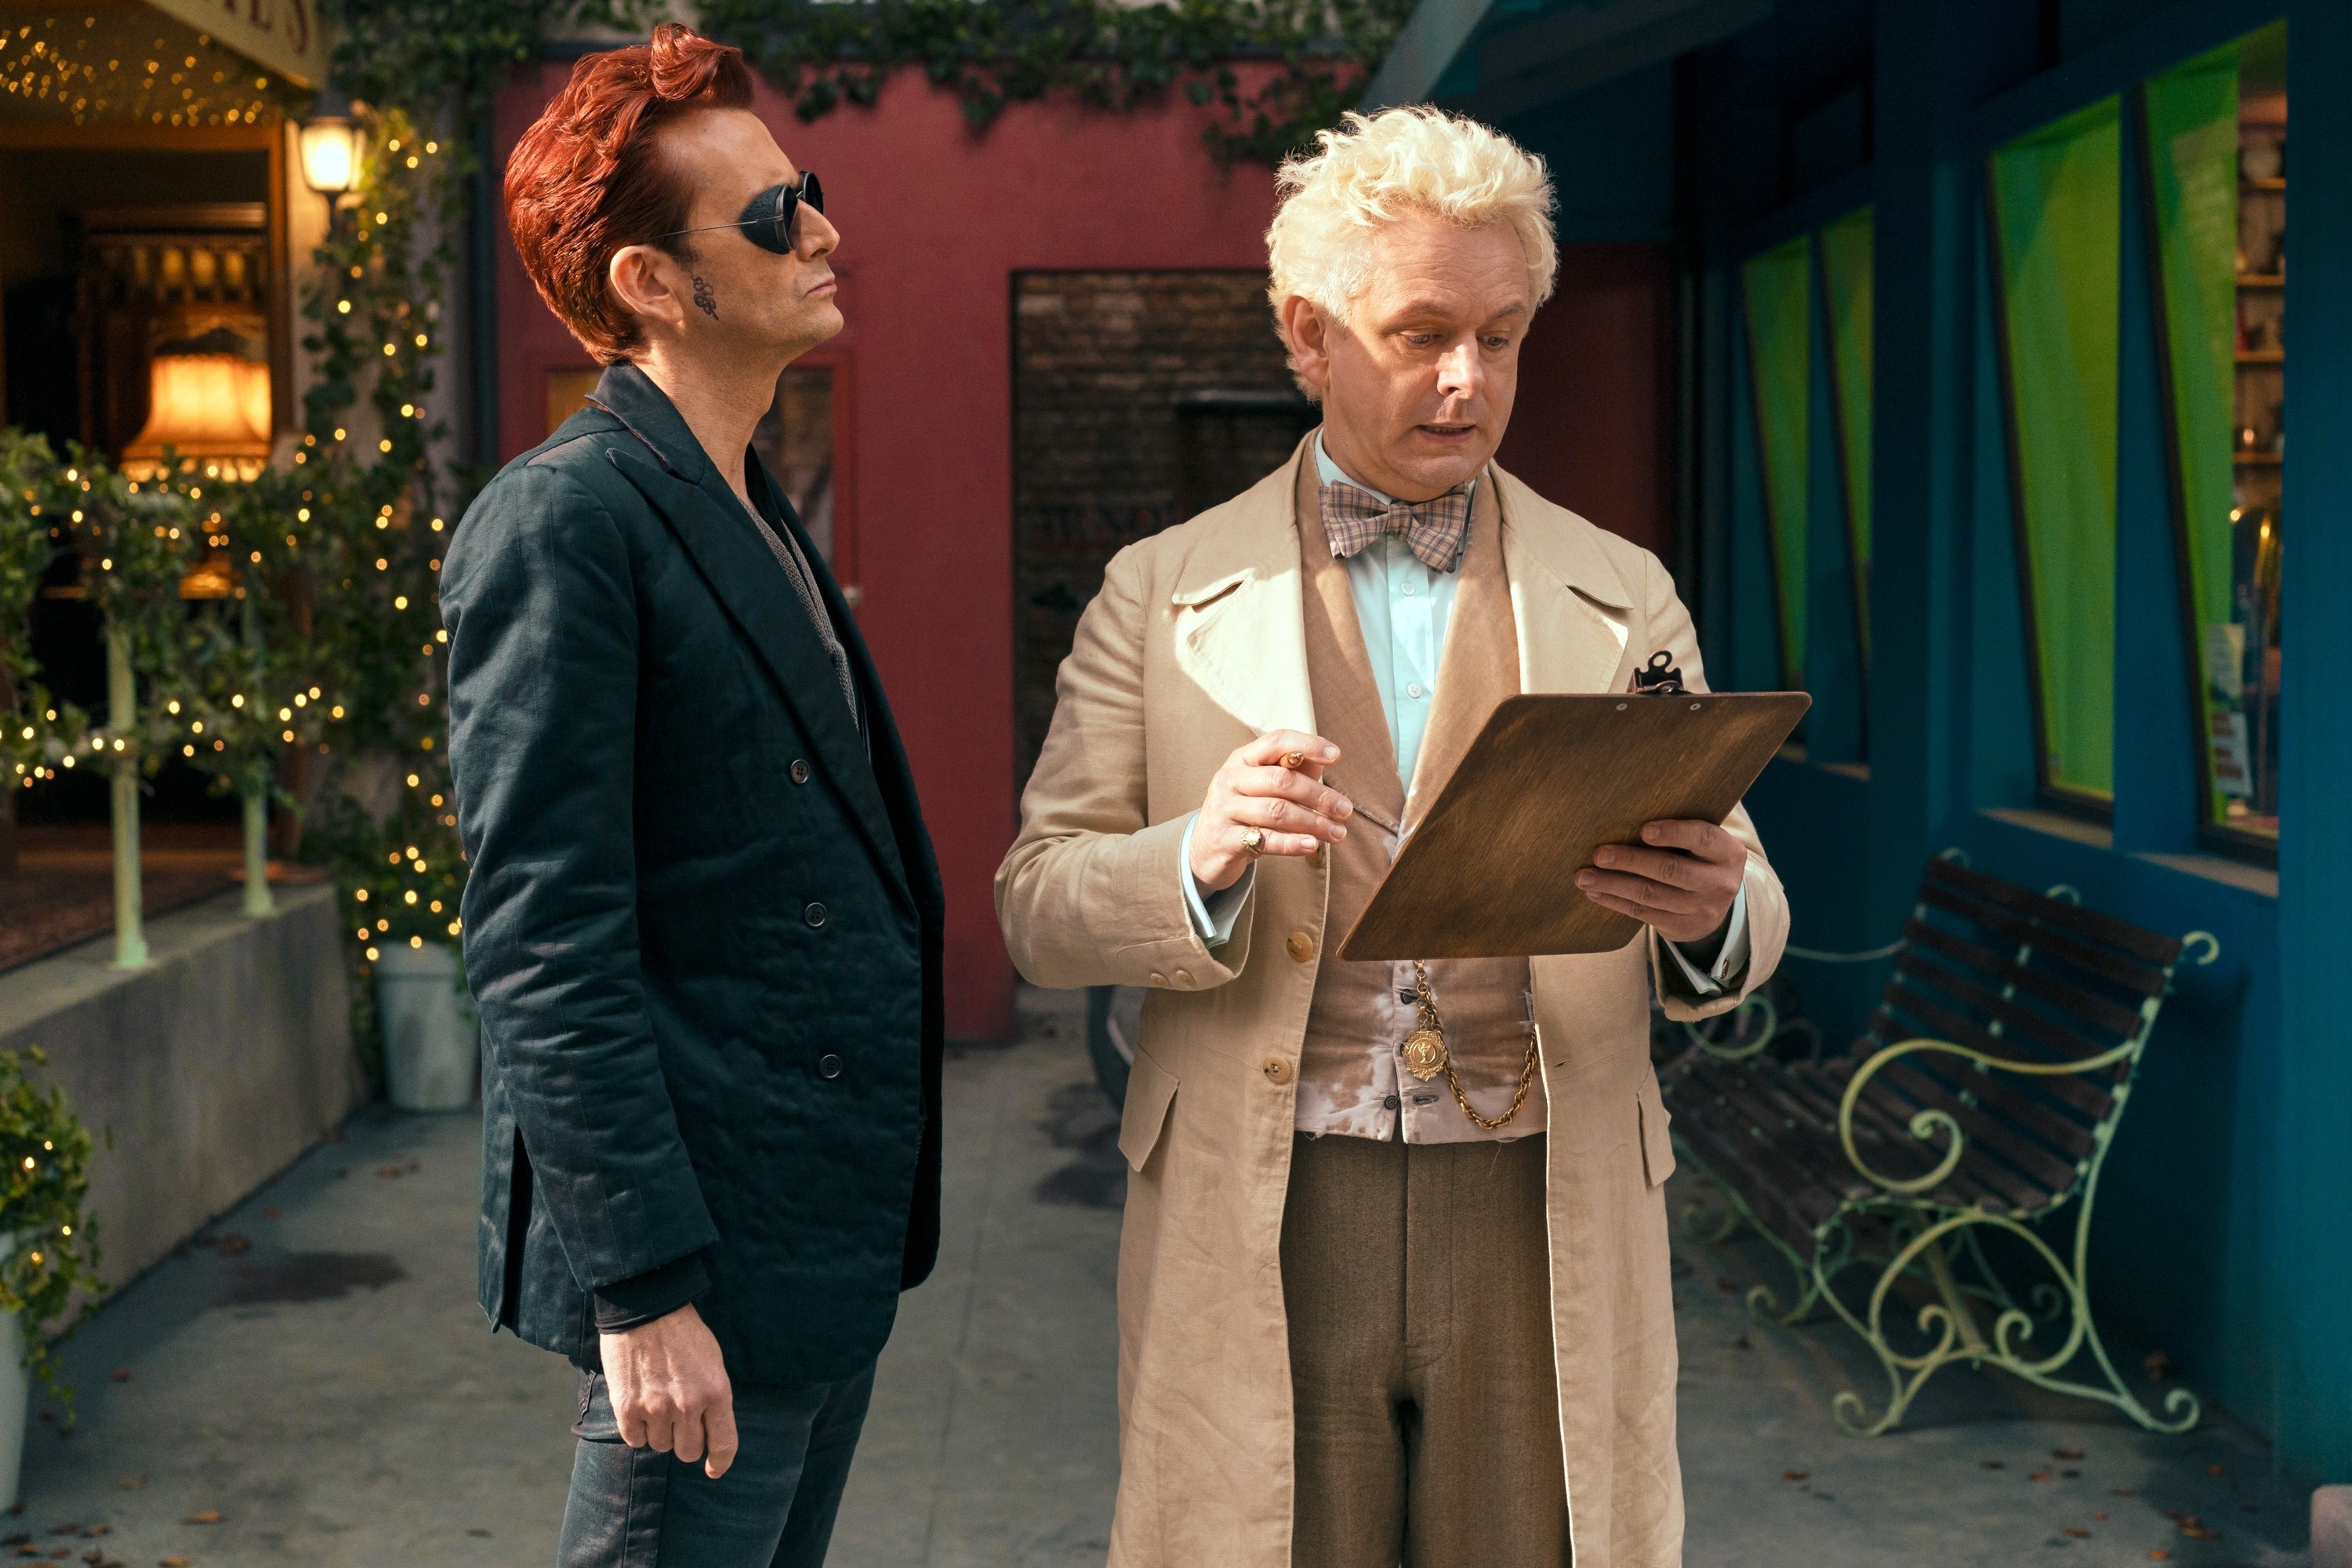 Two characters from &quot;Good Omens,&quot; Crowley in aj acket and Aziraphale in a bow tie, examine a clipboard